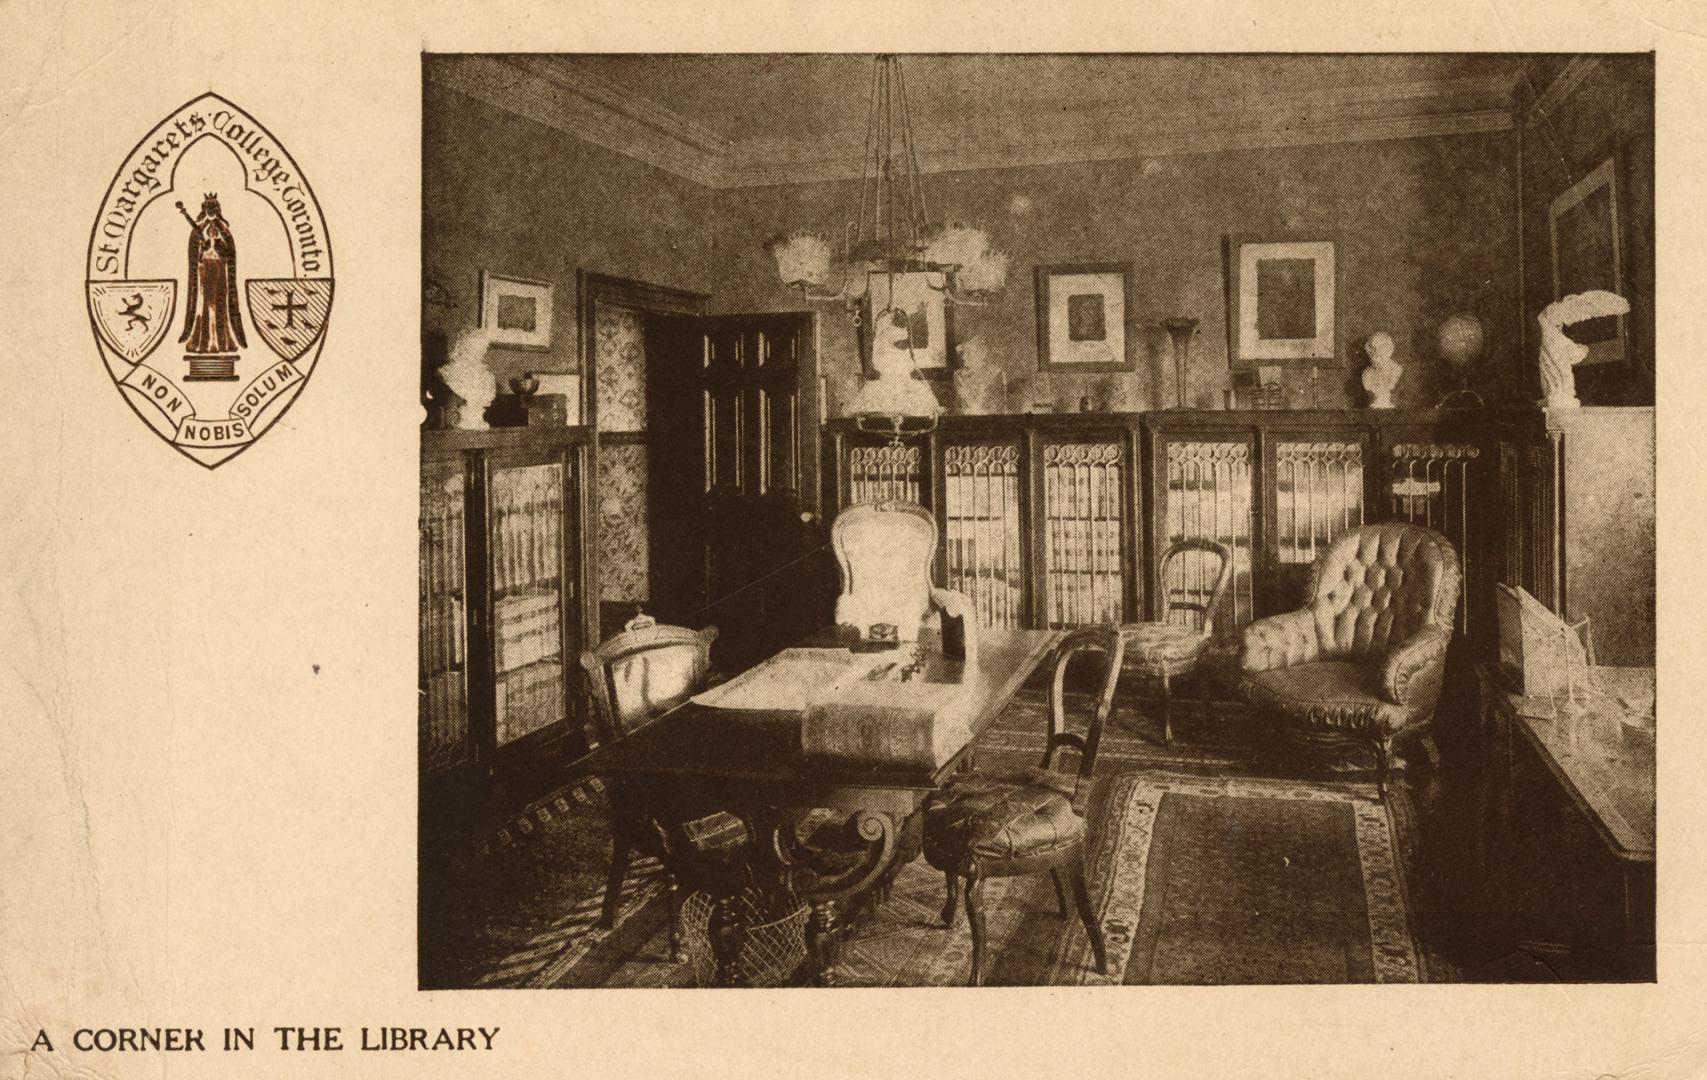 Picture of the interior of a library room with border and school crest on right side of card. 